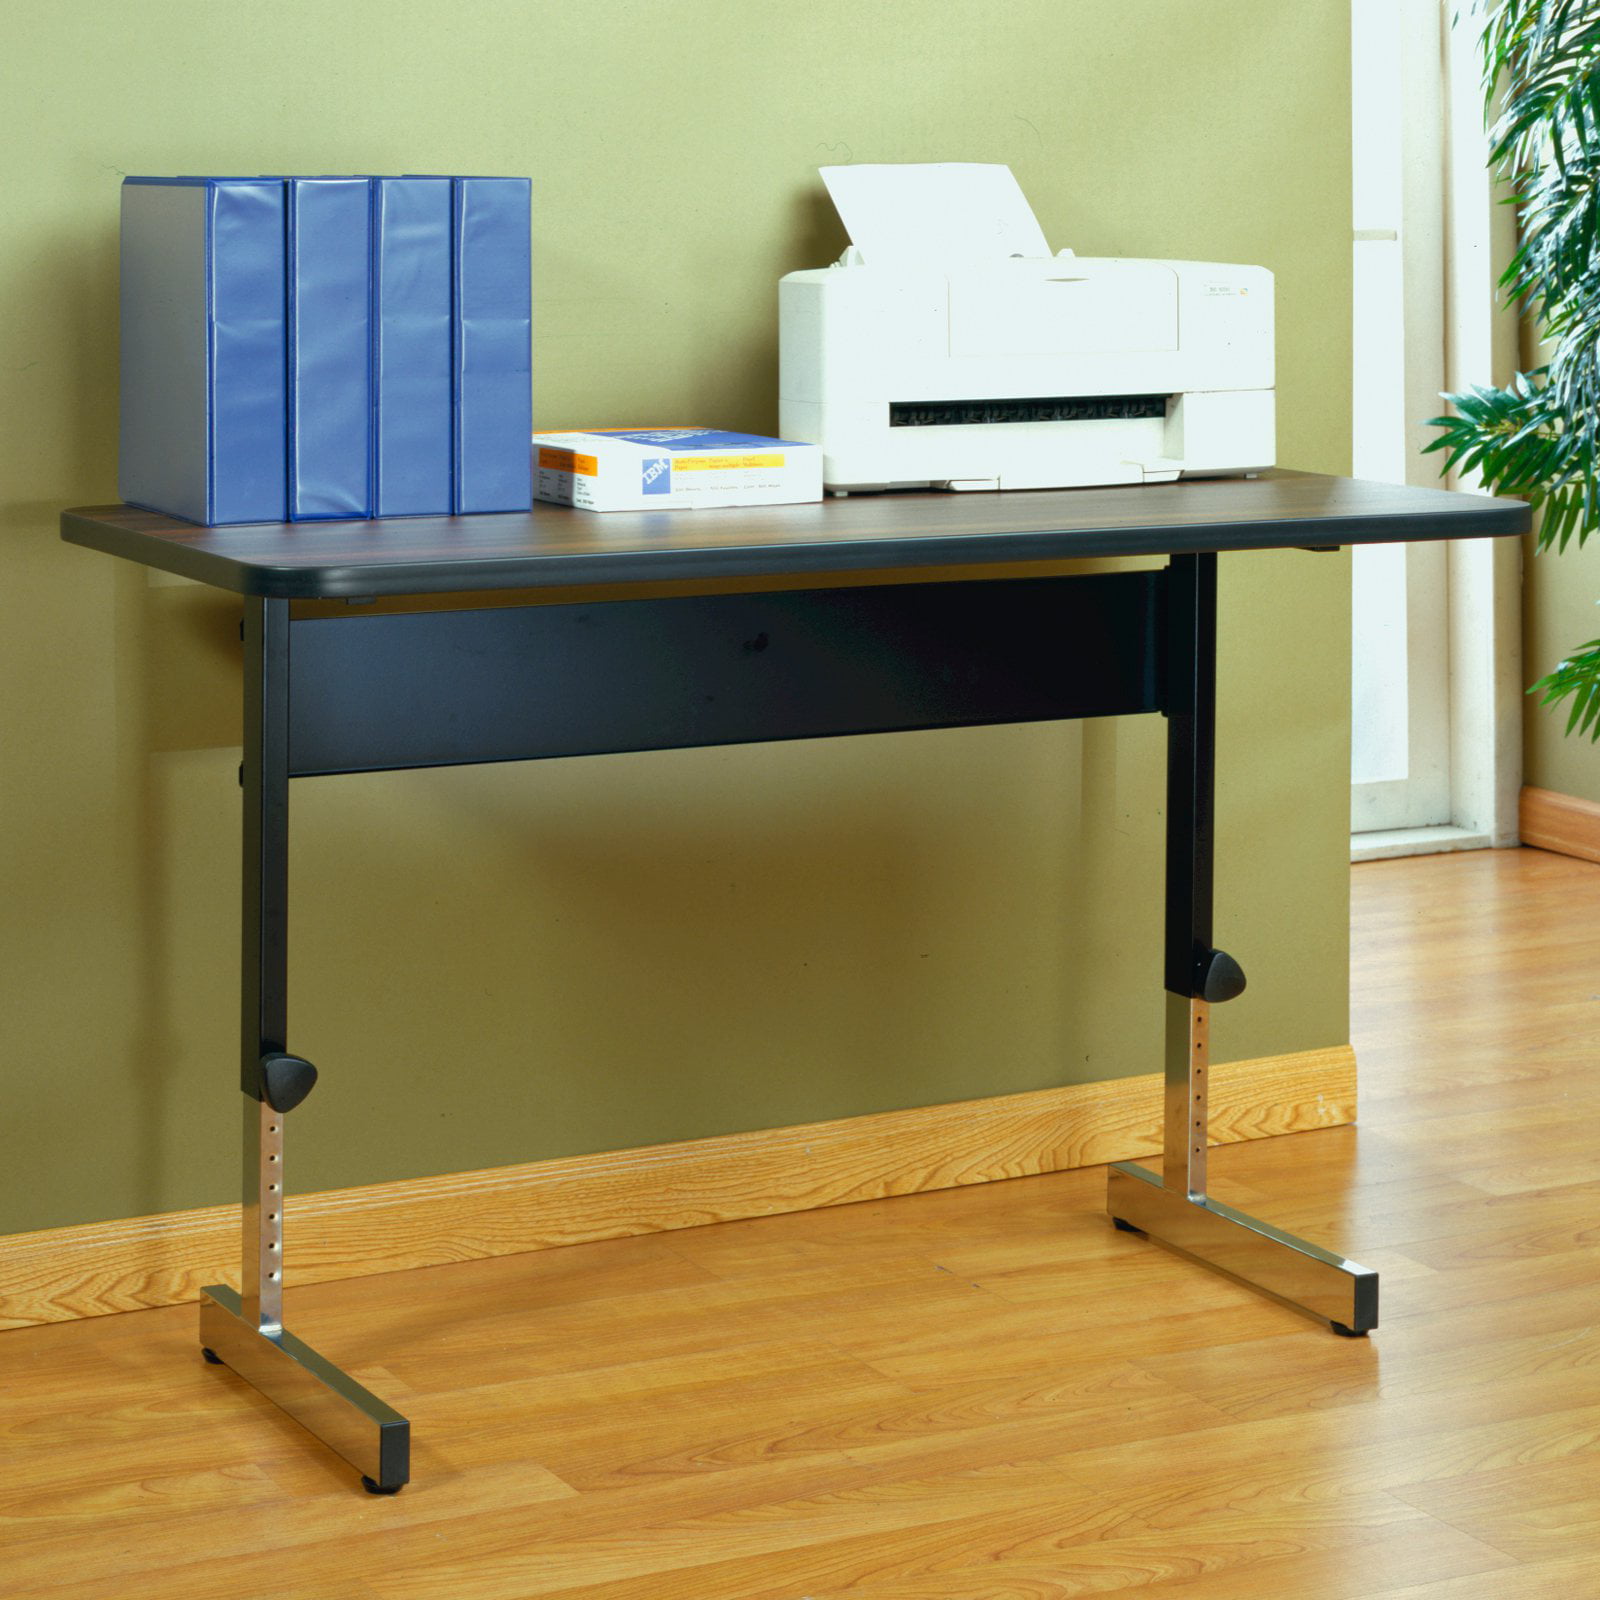 Photo 1 of (DAMAGED TABLE CORNERS AND TOP)
Studio Designs Adapta Height Adjustable All-Purpose Utility Office Desk 47.5" W x 30" D # 410380